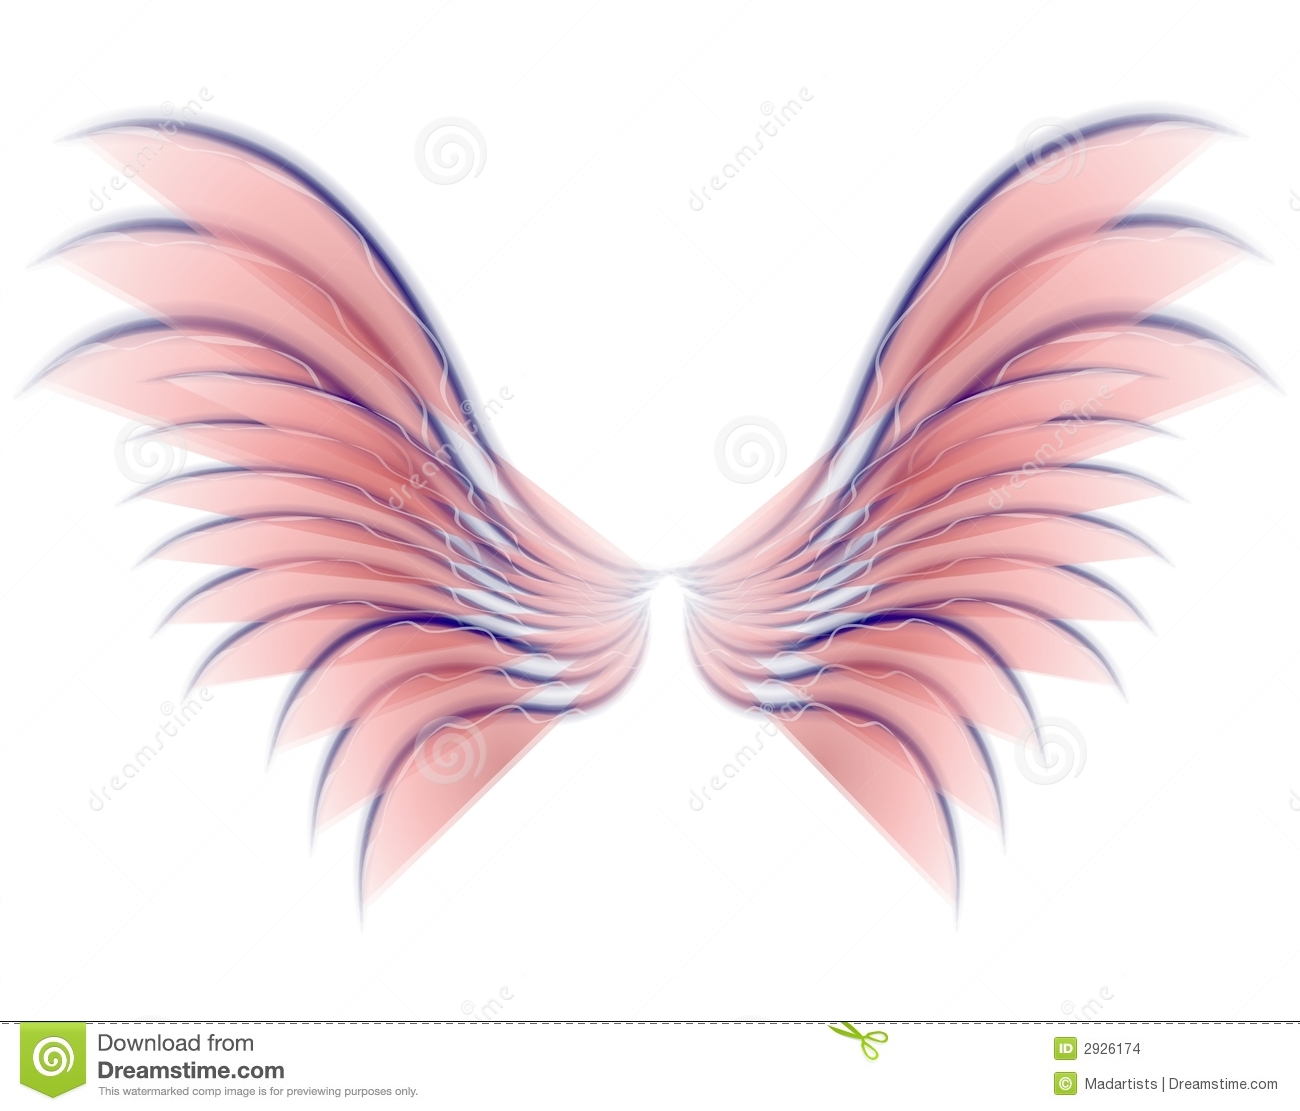 Clip Art Illustration Of Isolated Fairy Angel Or Bird Wings In Pink